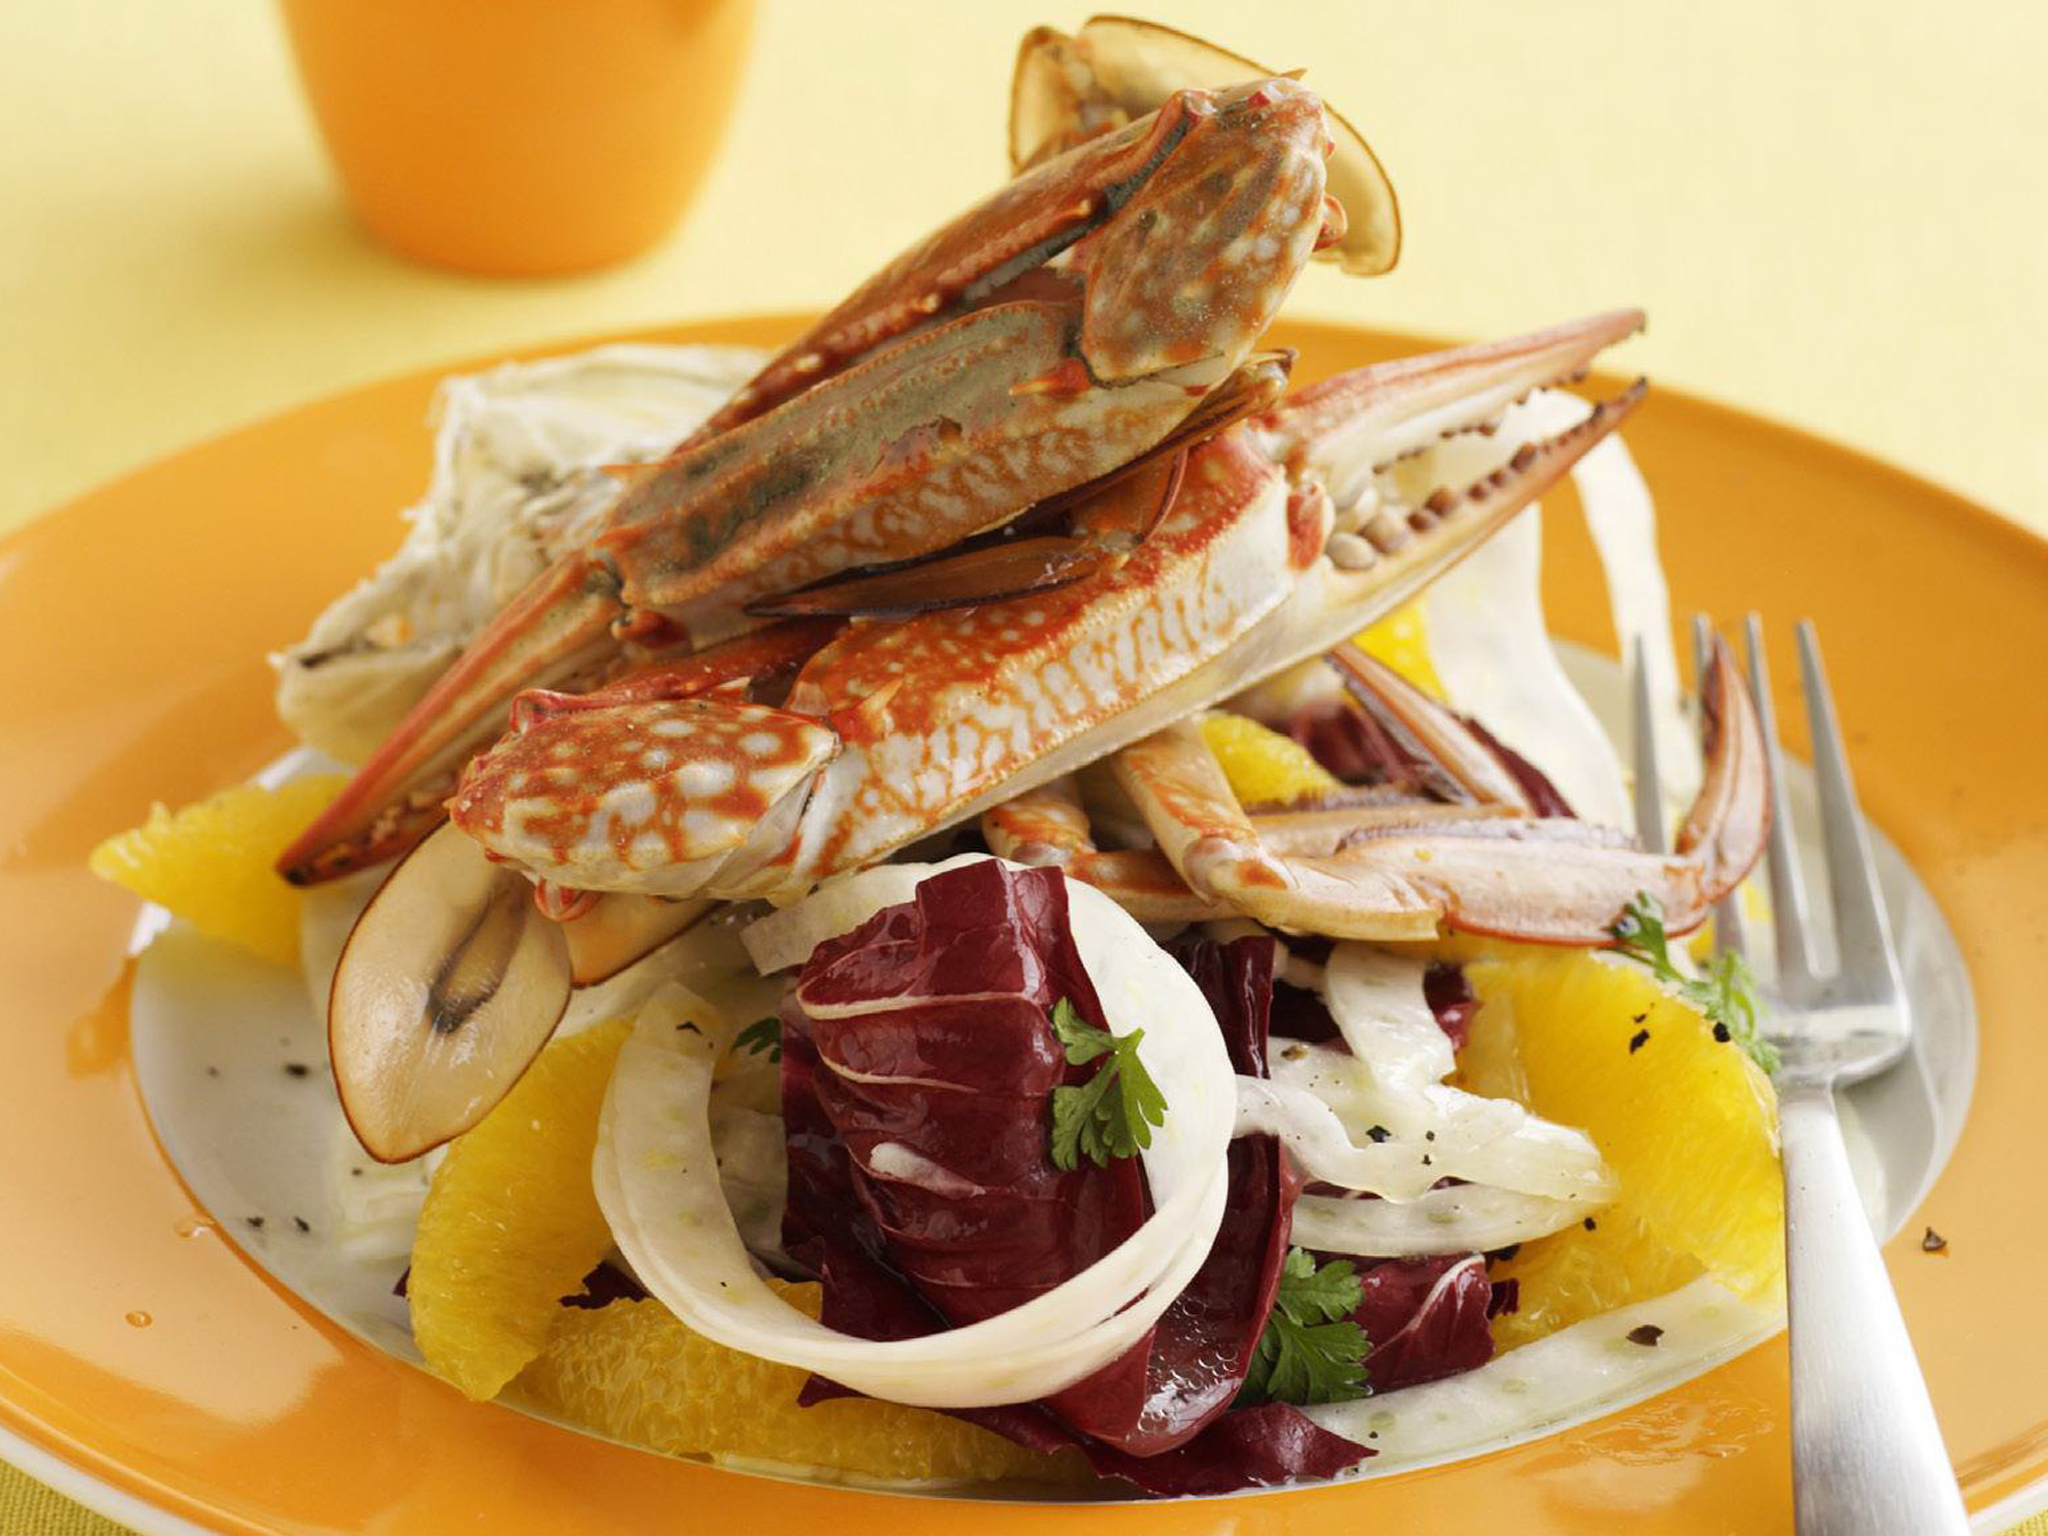 Crab with fennel salad